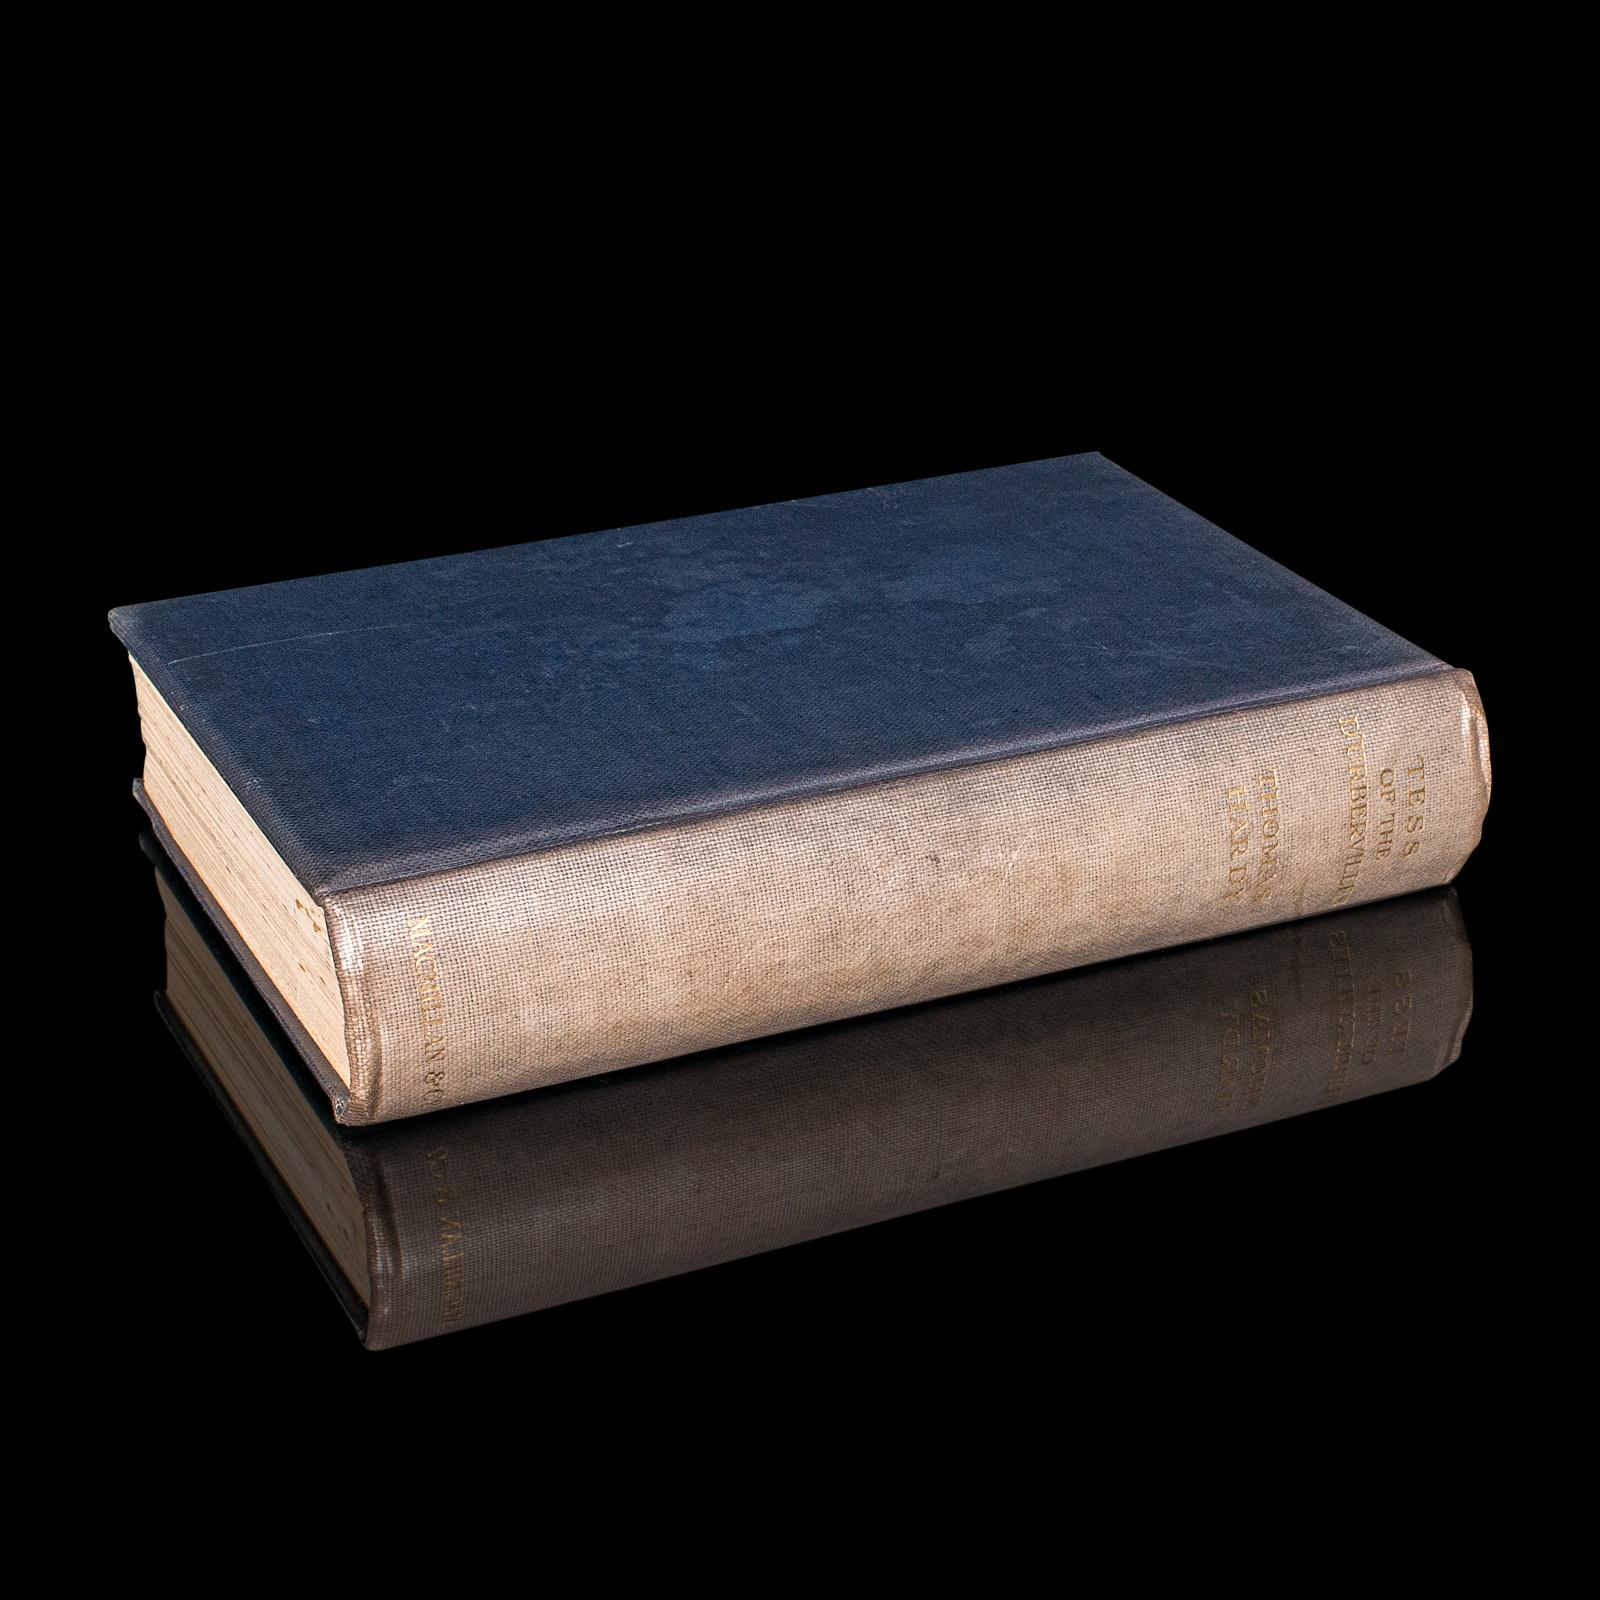 This is a vintage copy of Tess of the D'Urbervilles by Thomas Hardy. An English, cloth bound limited edition novel, dating to the early 20th century, published 1926.

Often set in the semi fictional region of Wessex, Thomas Hardy (1840 - 1928) was a